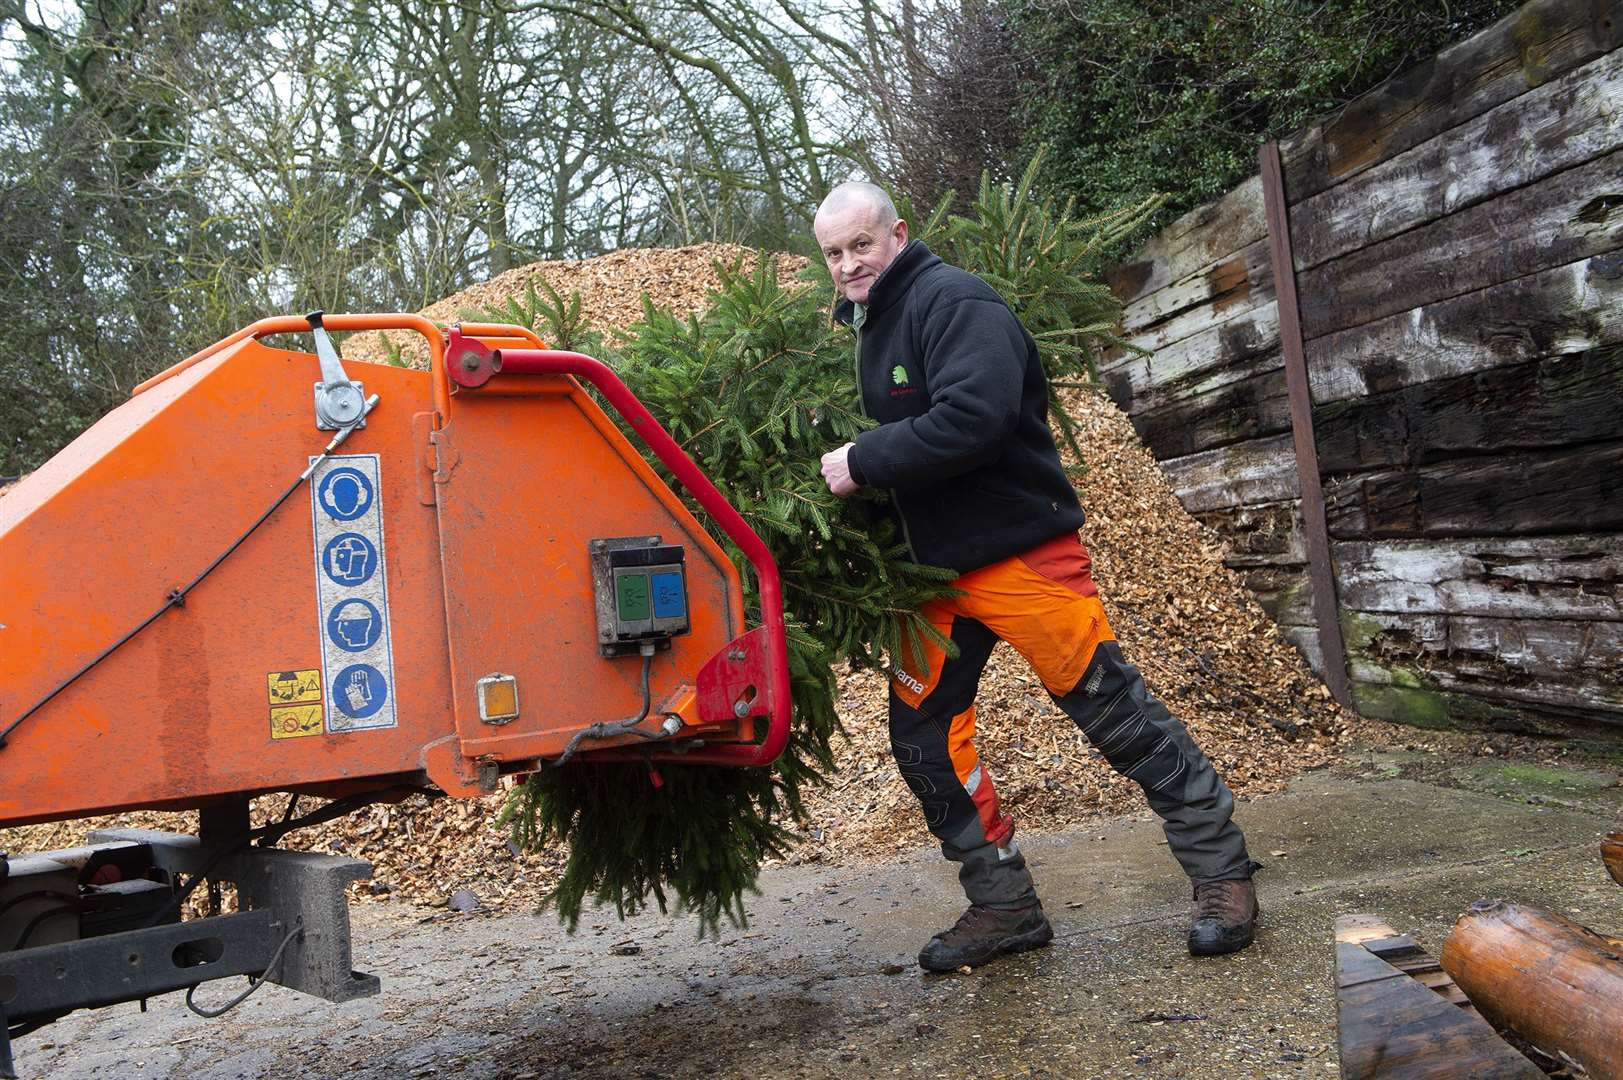 Households with a real tree are encouraging to recycle it once they're finished with festive celebrations